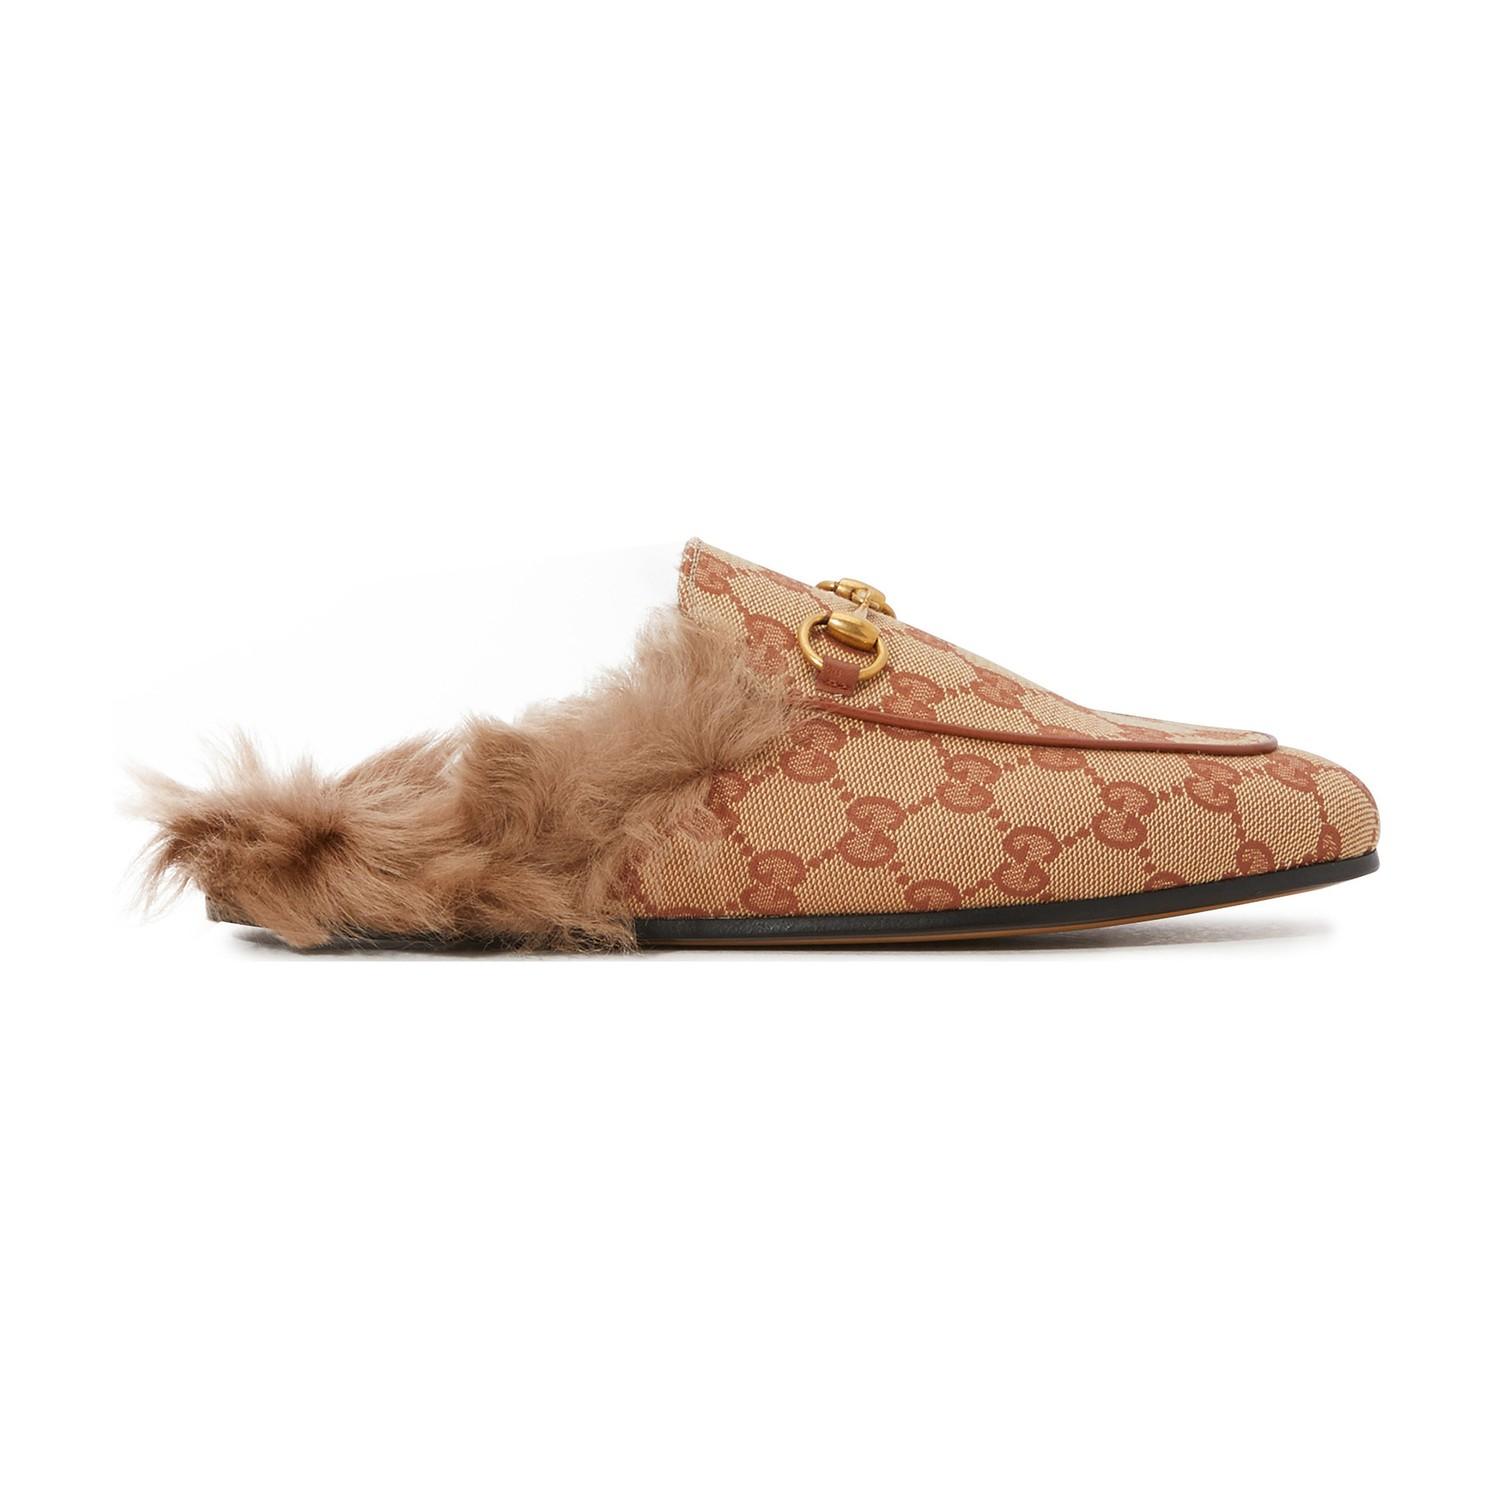 Gucci Canvas Princetown Fur-lined Mules in Beige (Natural) - Lyst